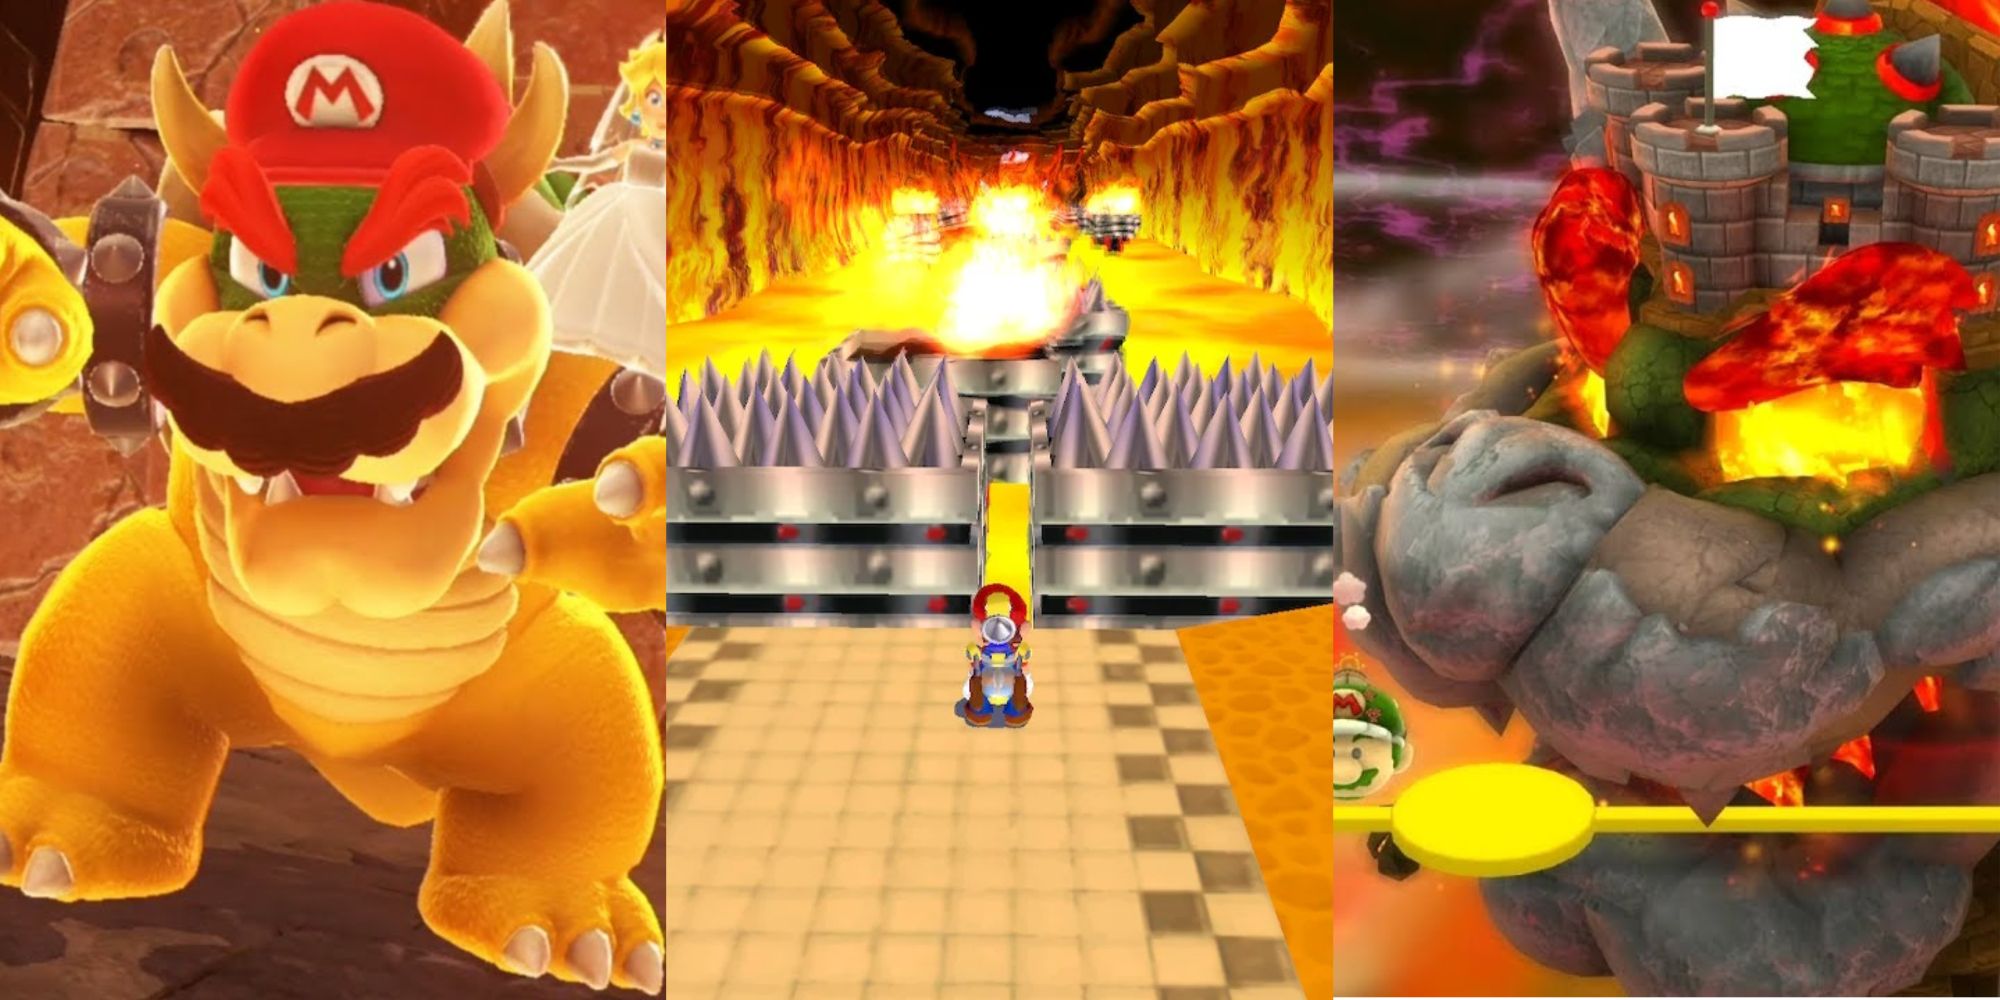 Image showing various Mario final worlds, typically featuring lava and Bowser.